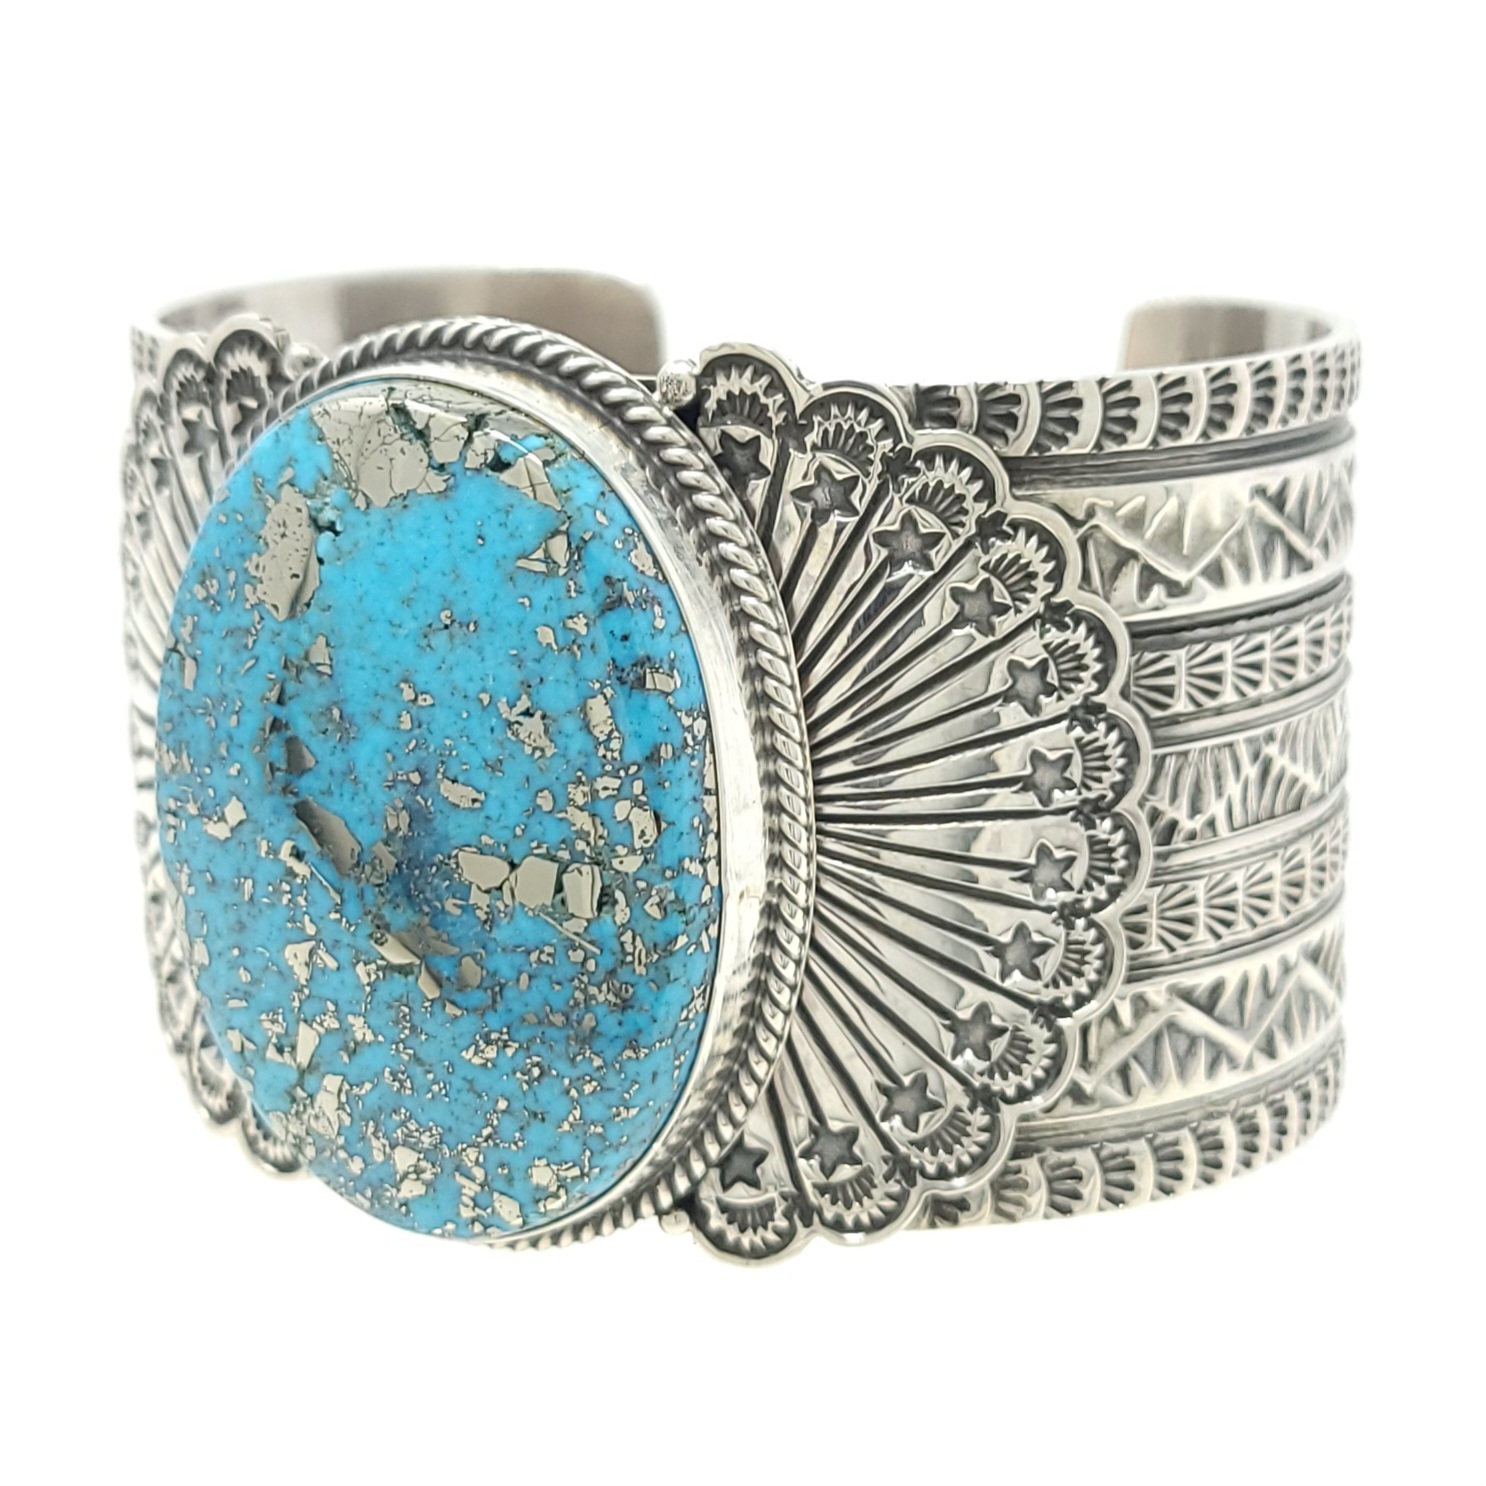 Sunshine Reeves Sterling Silver Navajo Handmade Cuff Bracelet Persian Turquoise